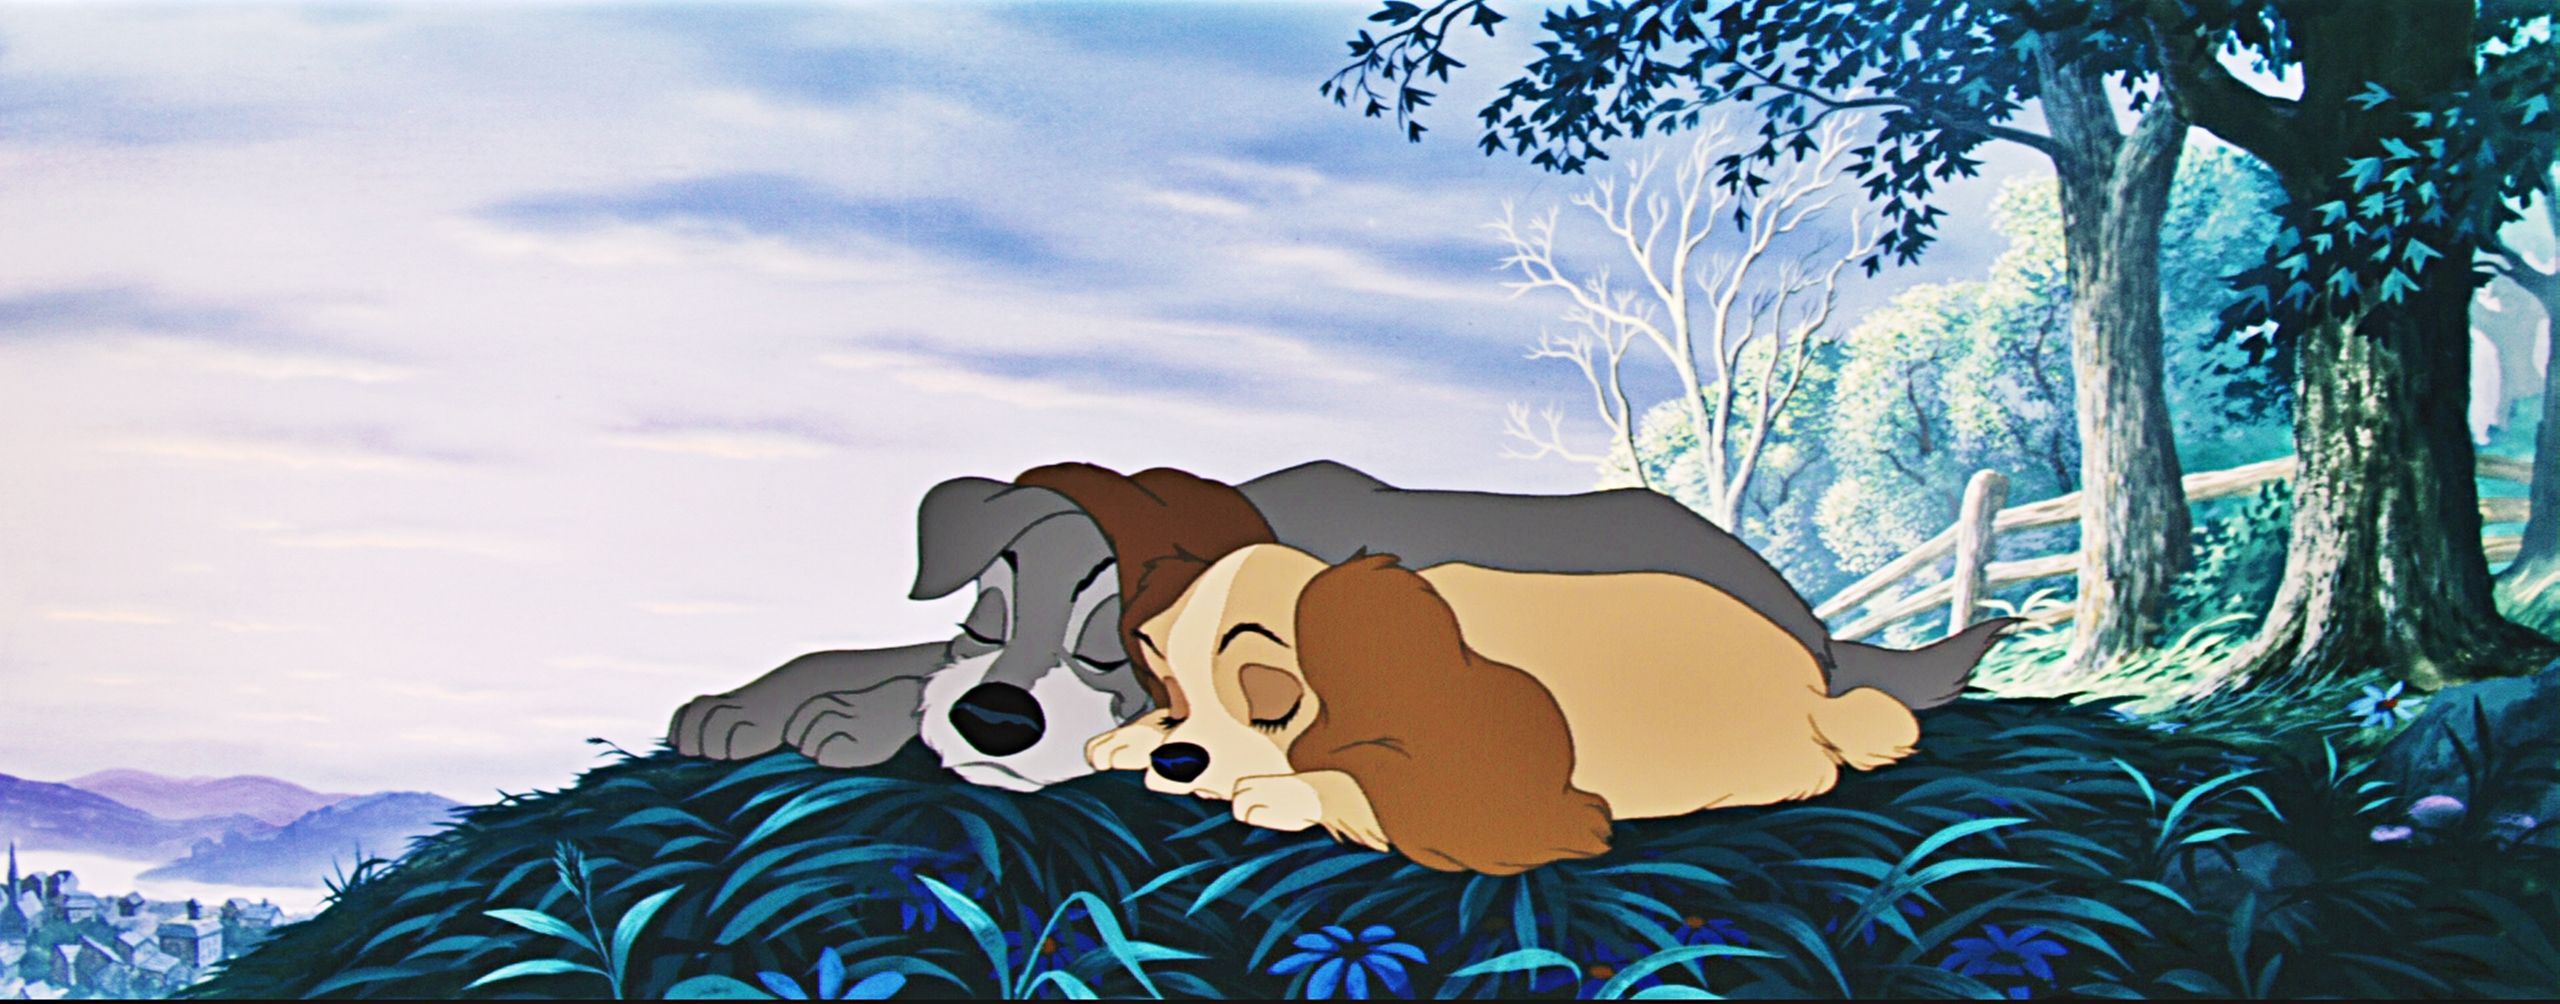 Lady and the tramp HD wallpapers free download  Wallpaperbetter